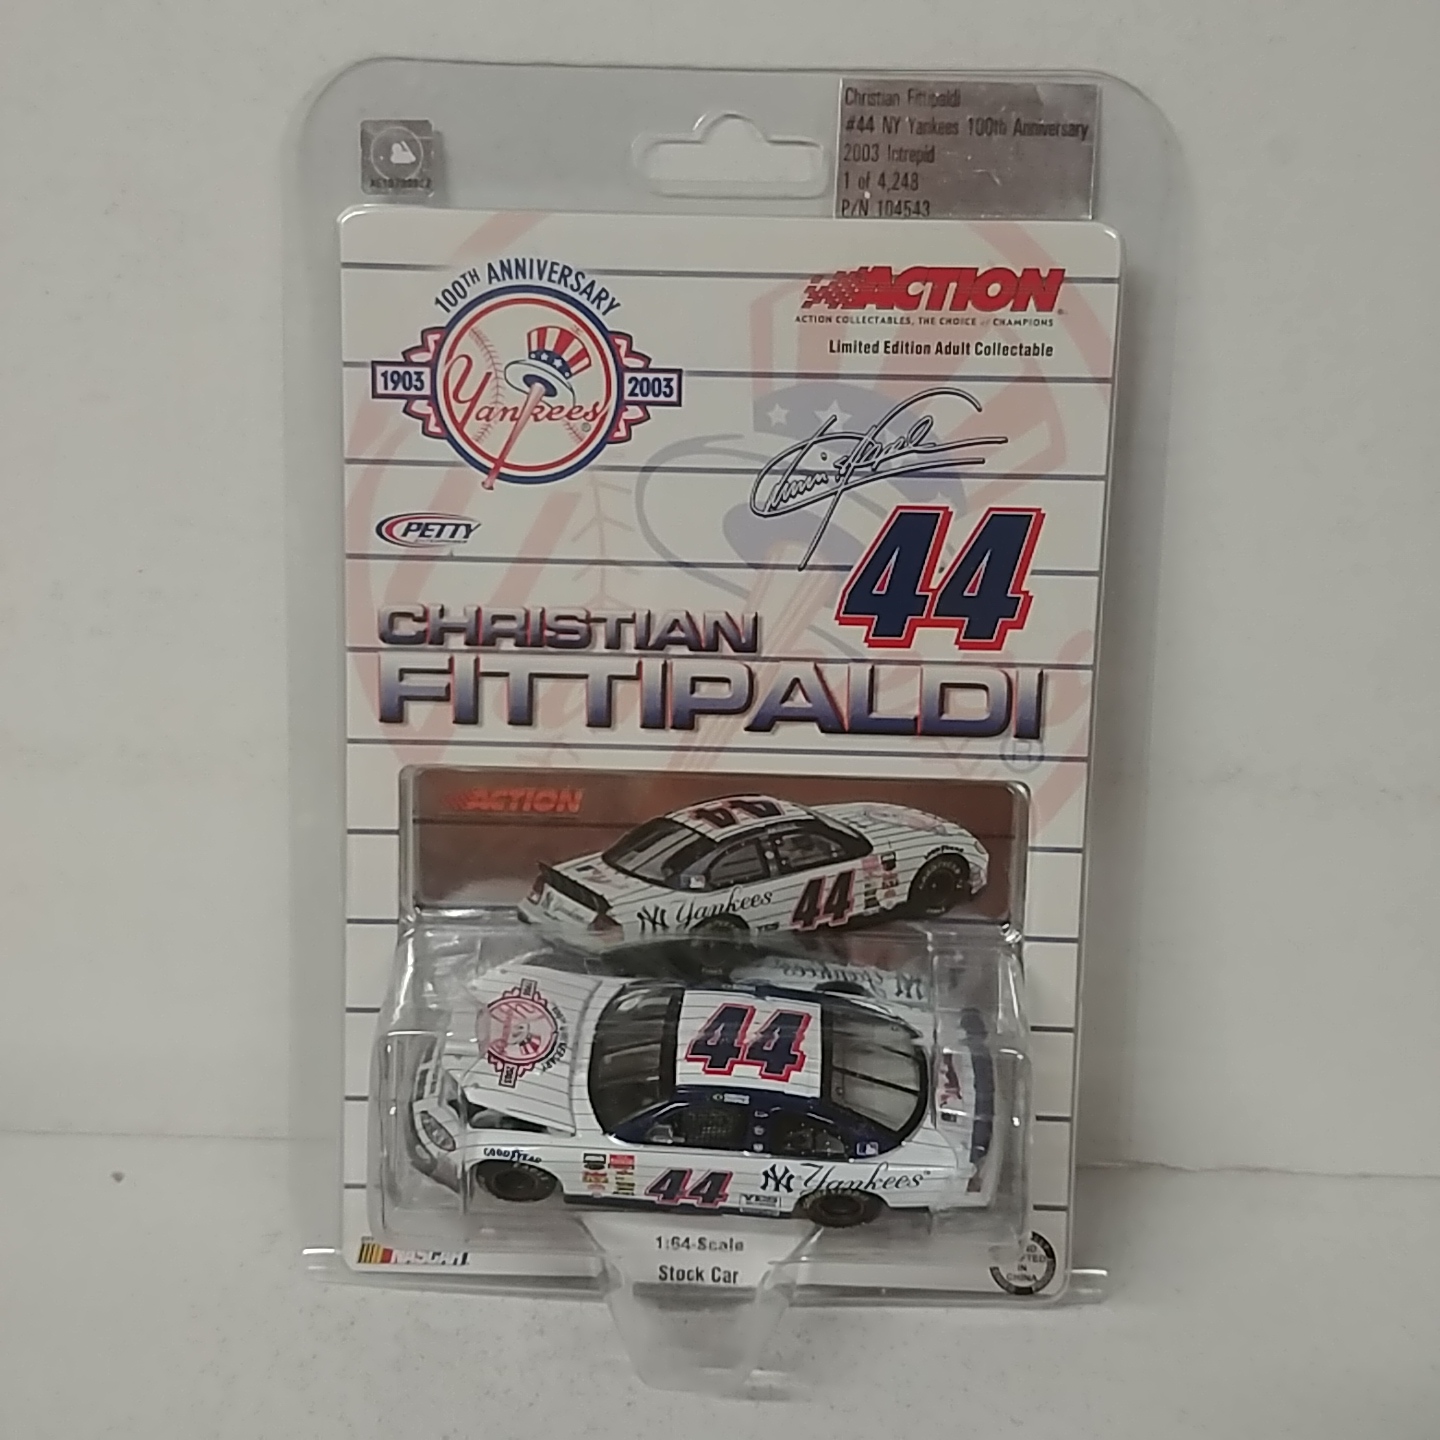 2003 Christian Fittipaldi 1/64th NY Yankees "100th Anniversary" ARC hood open Intrepid